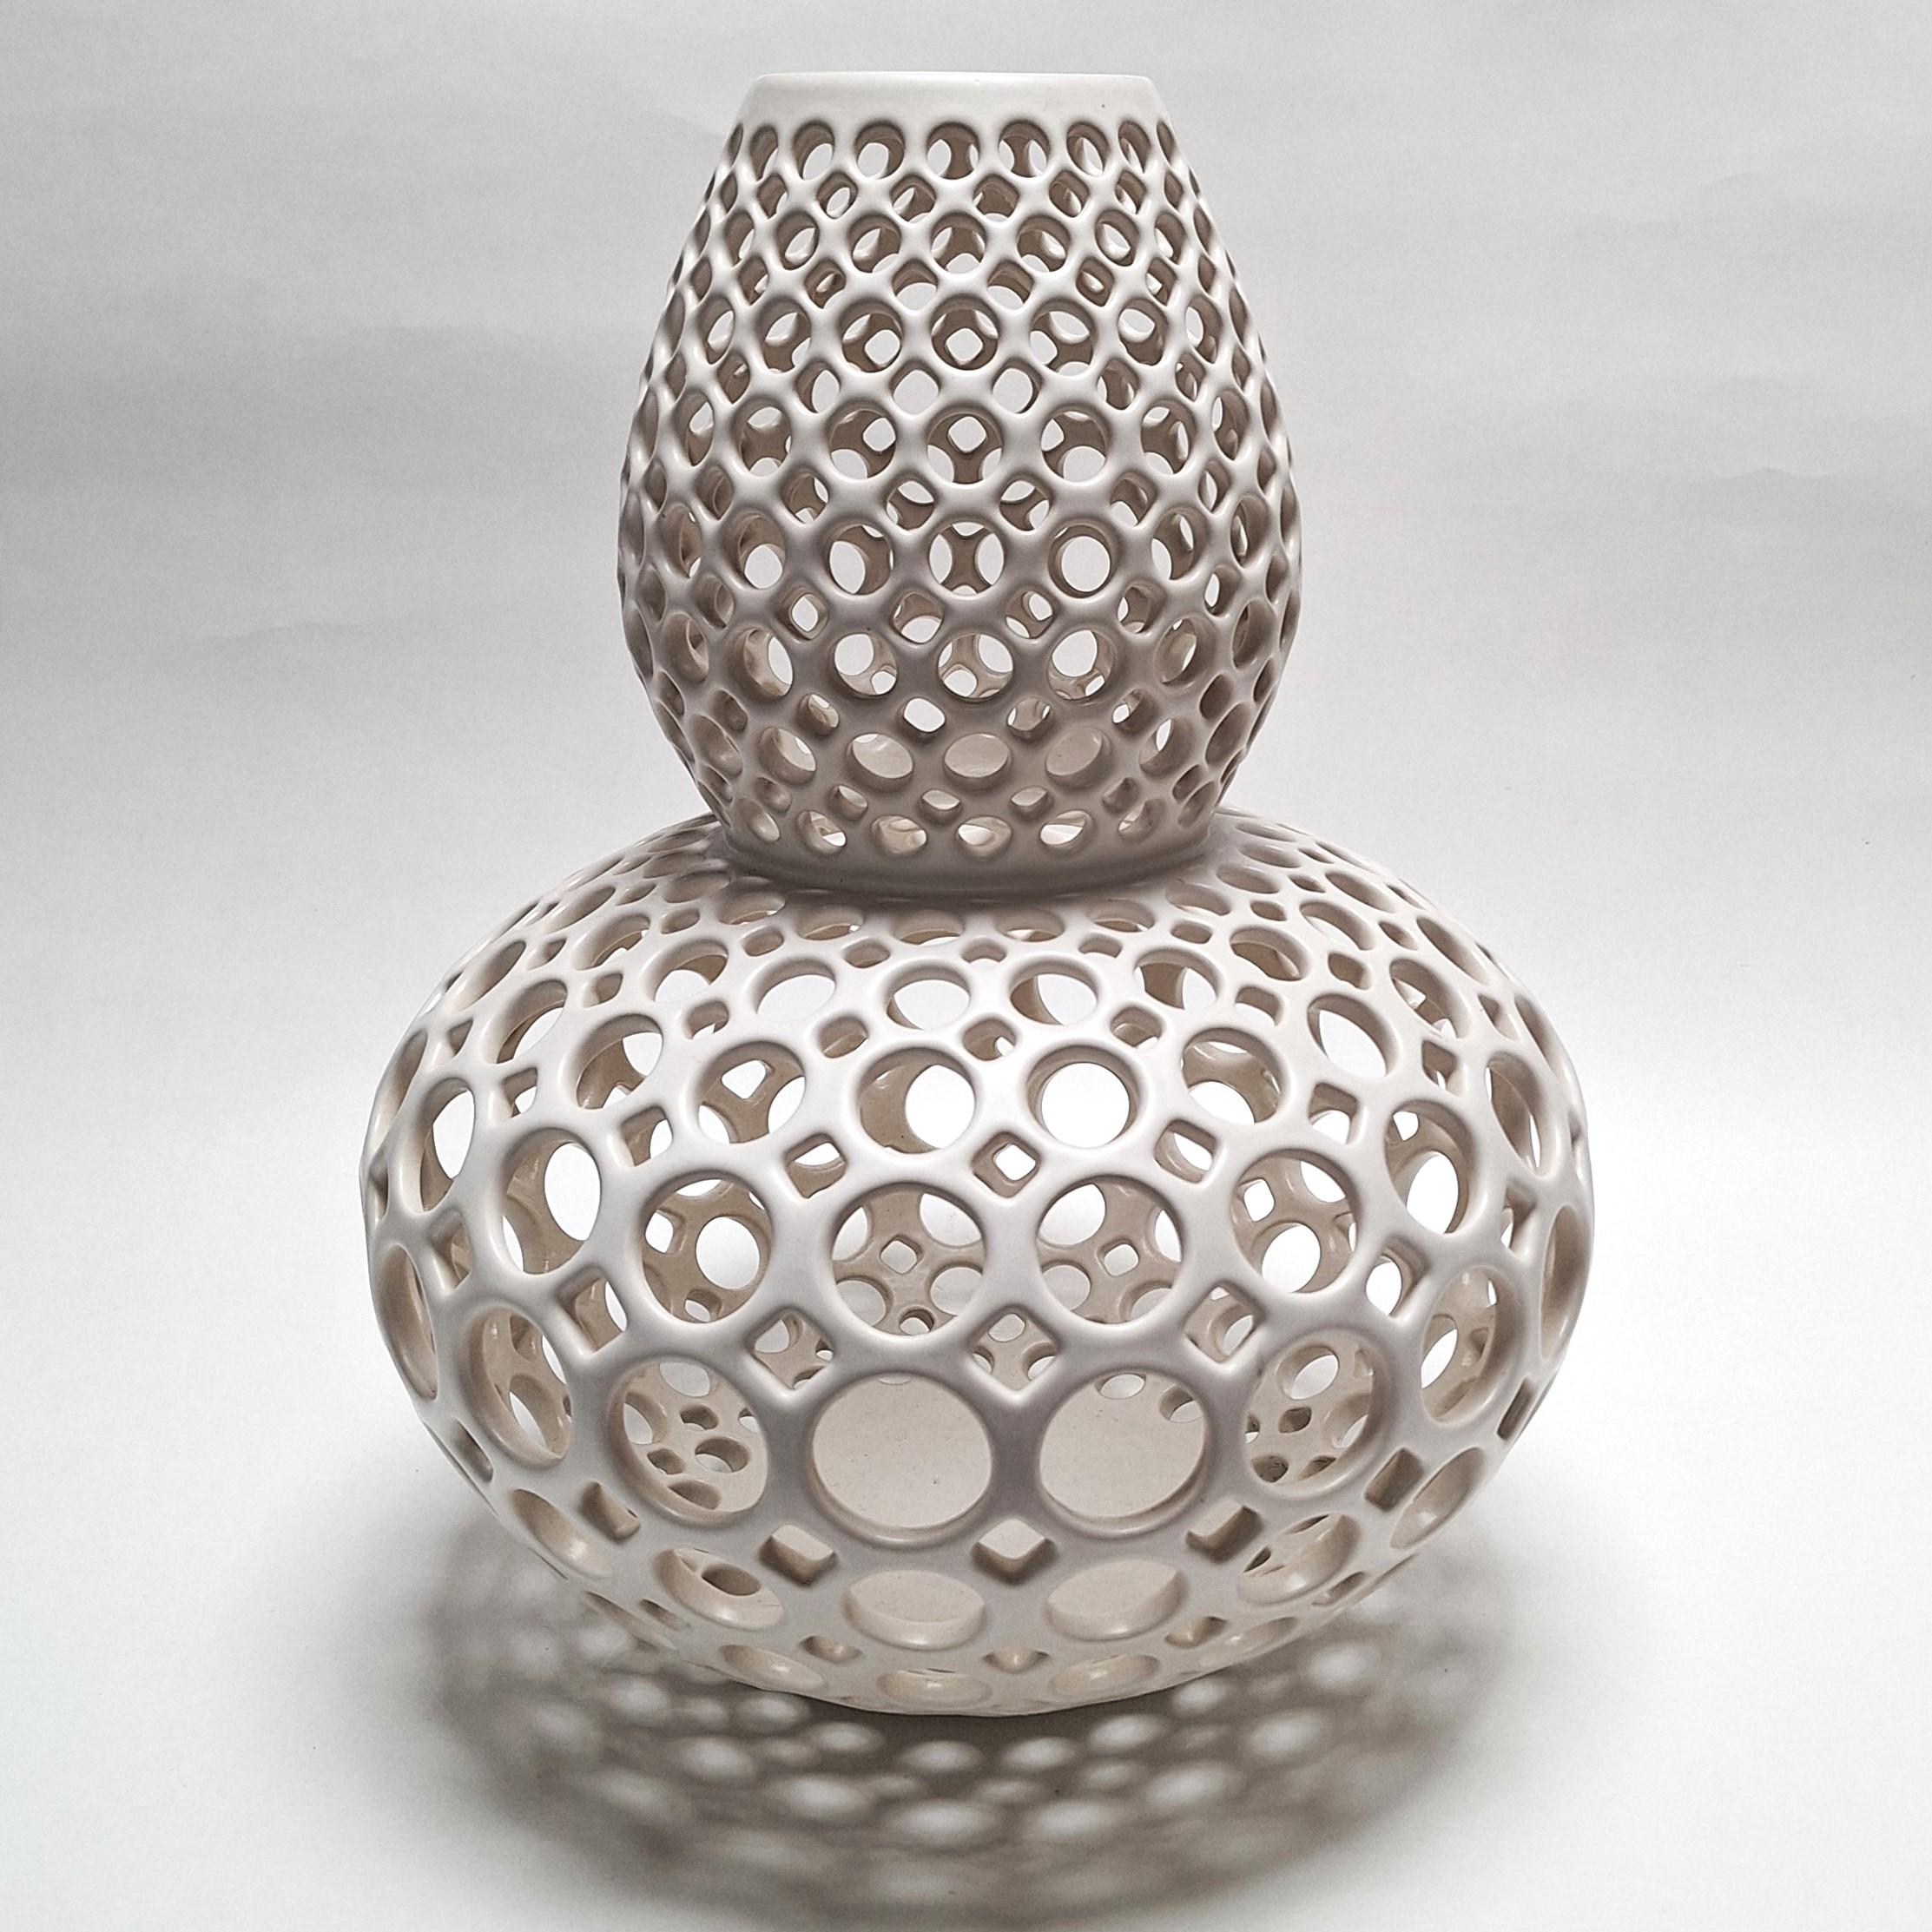 Double Gourd Round Lace White - contemporary modern ceramic vessel object - Contemporary Sculpture by Lynne Meade